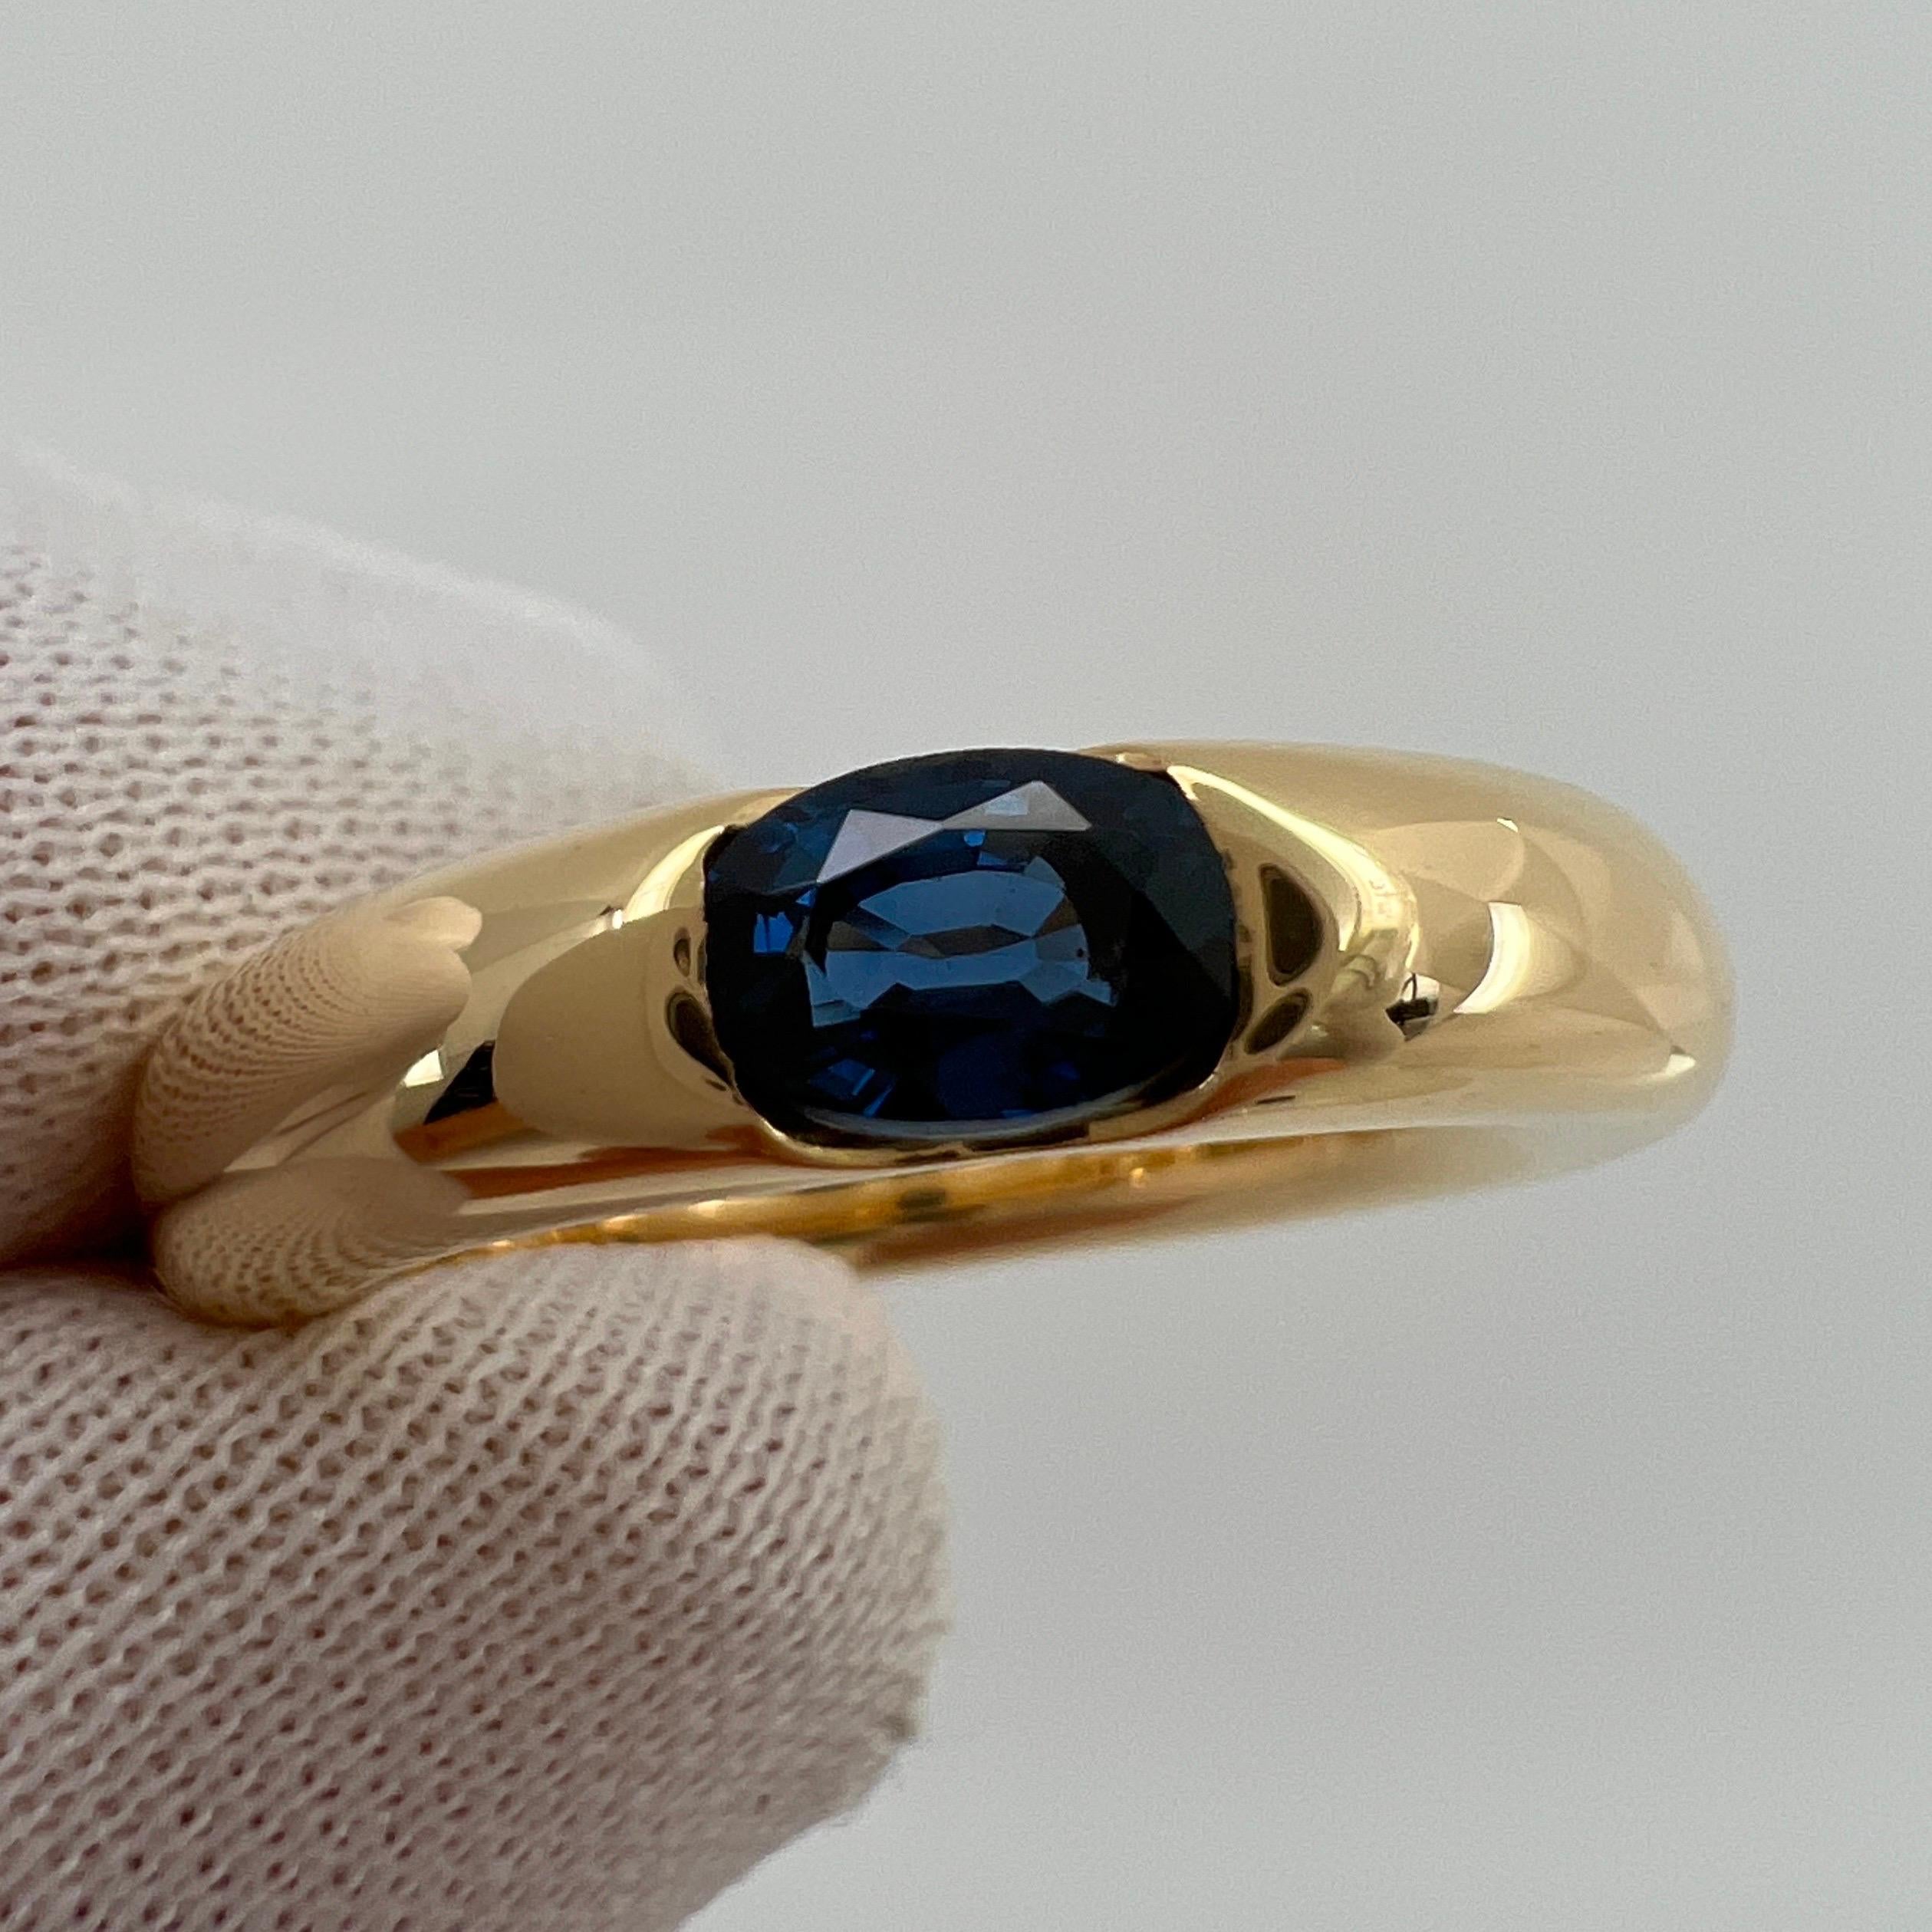 Vintage Cartier Deep Blue Sapphire Oval Ellipse 18k Yellow Gold Solitaire Ring 5 7